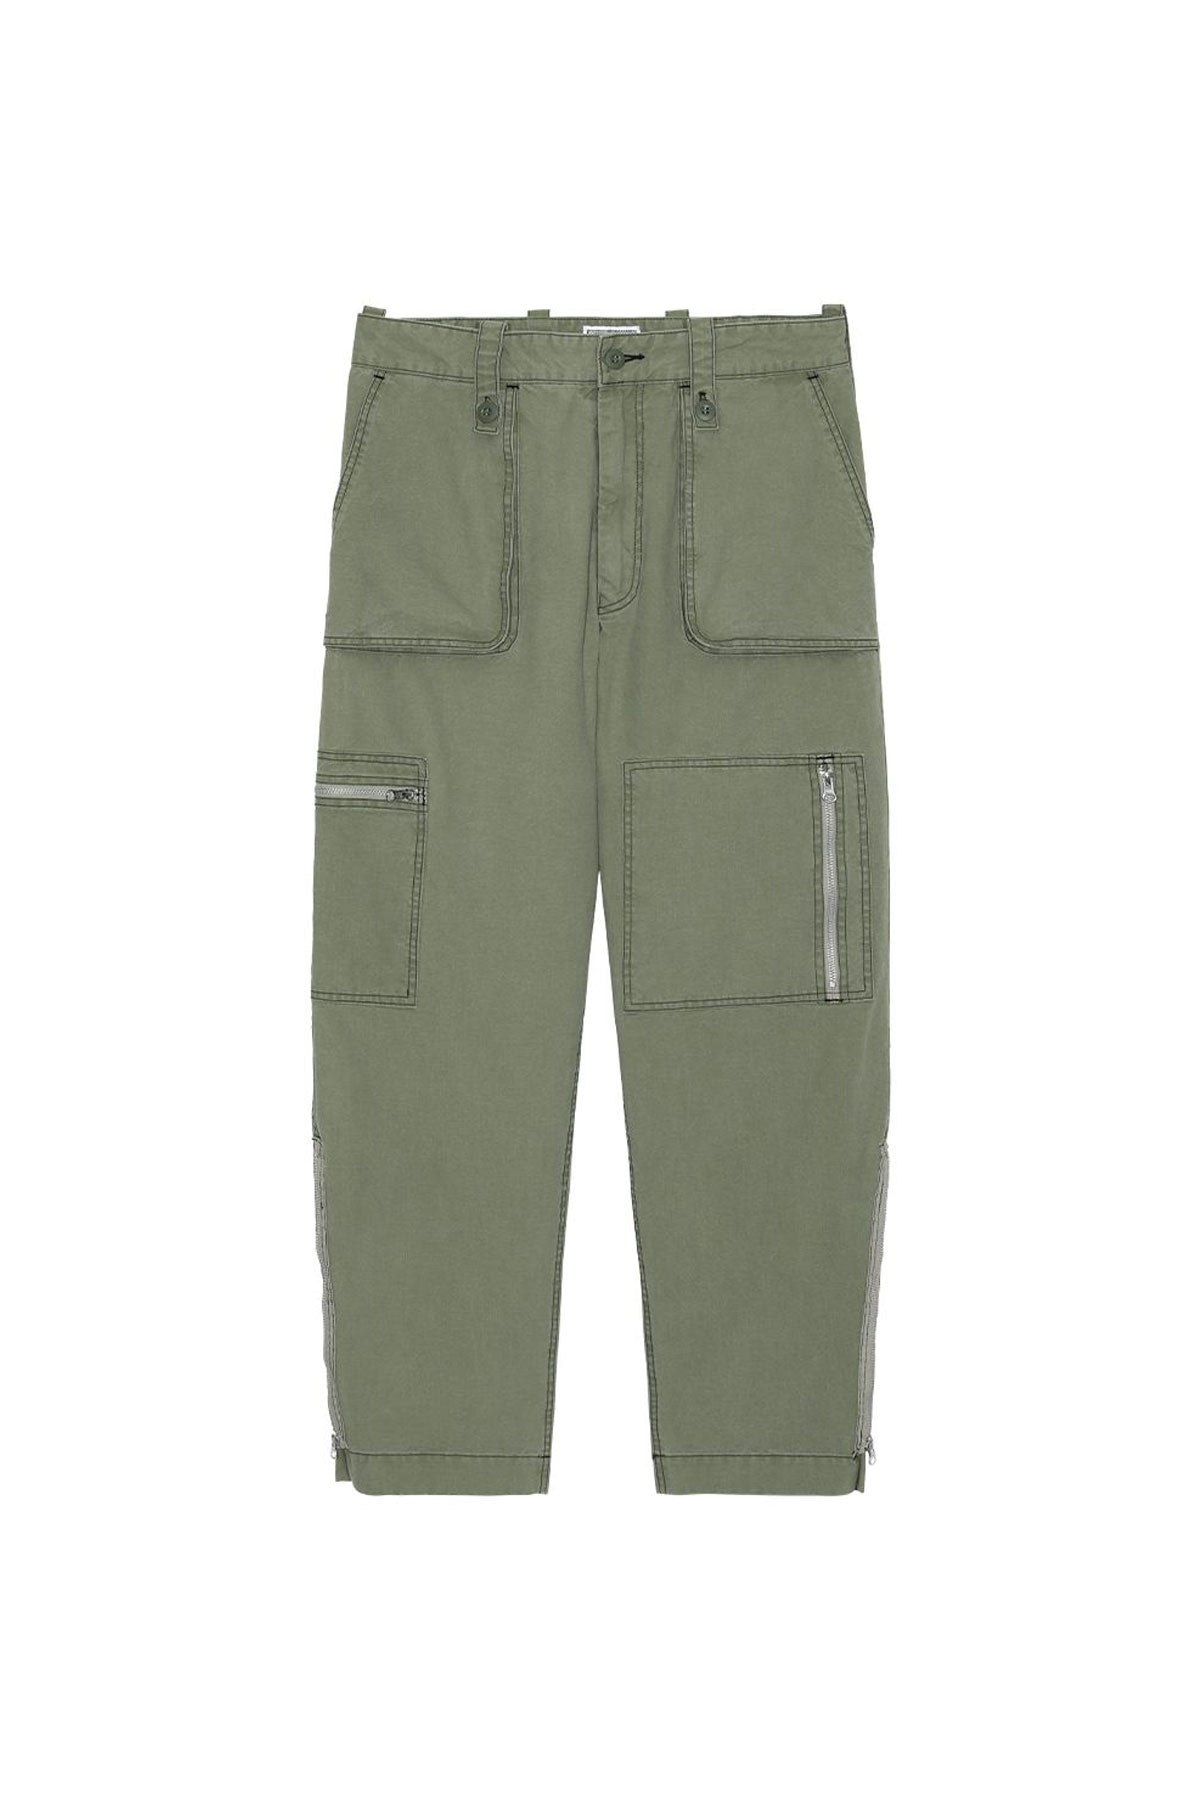 The CAV EMPT - YOSSARIAN PANTS #5 GREEN  available online with global shipping, and in PAM Stores Melbourne and Sydney.